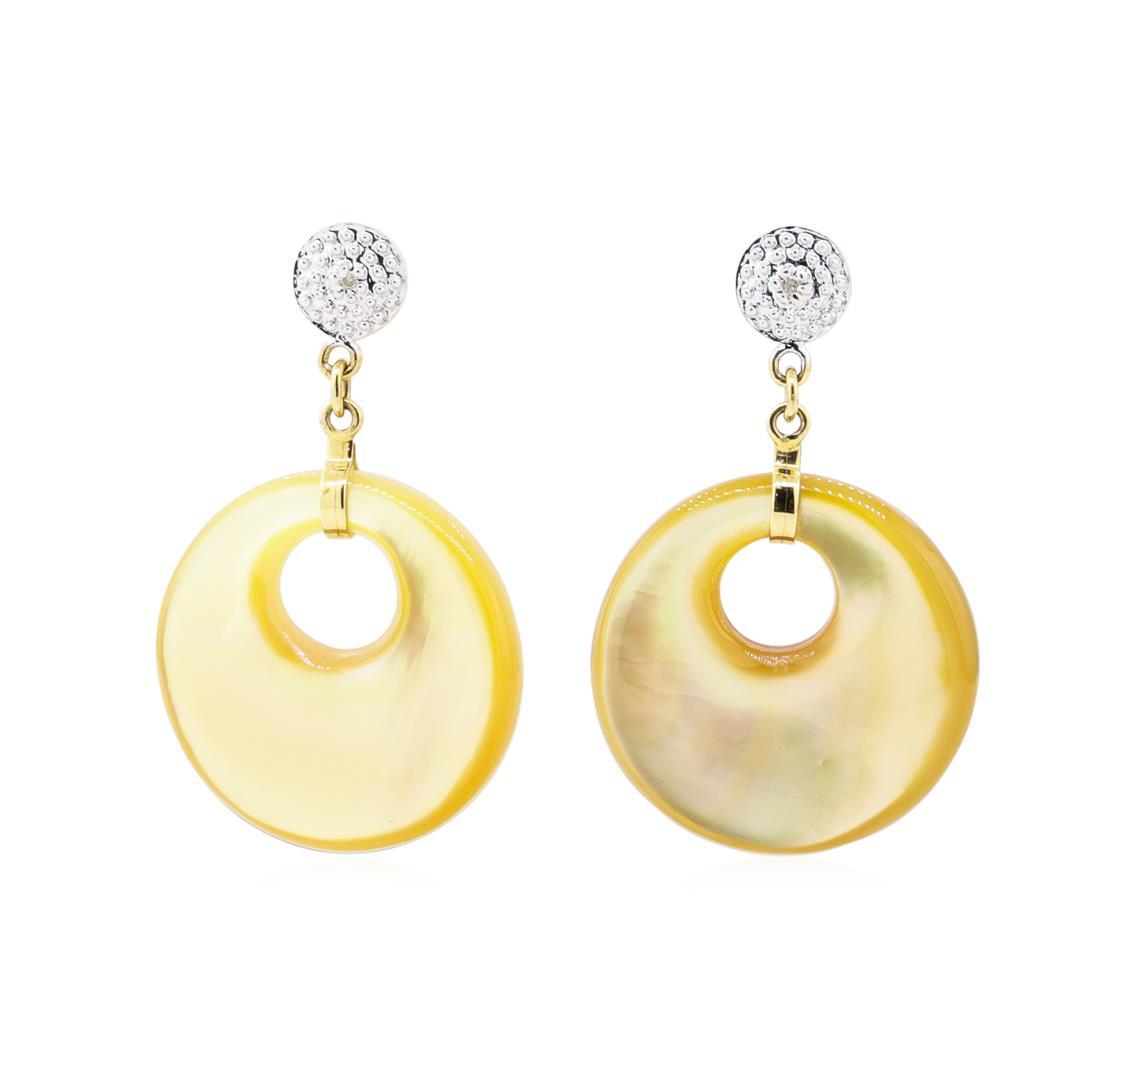 0.02 ctw Diamond and Mother of Pearl Earrings - 14KT Yellow Gold